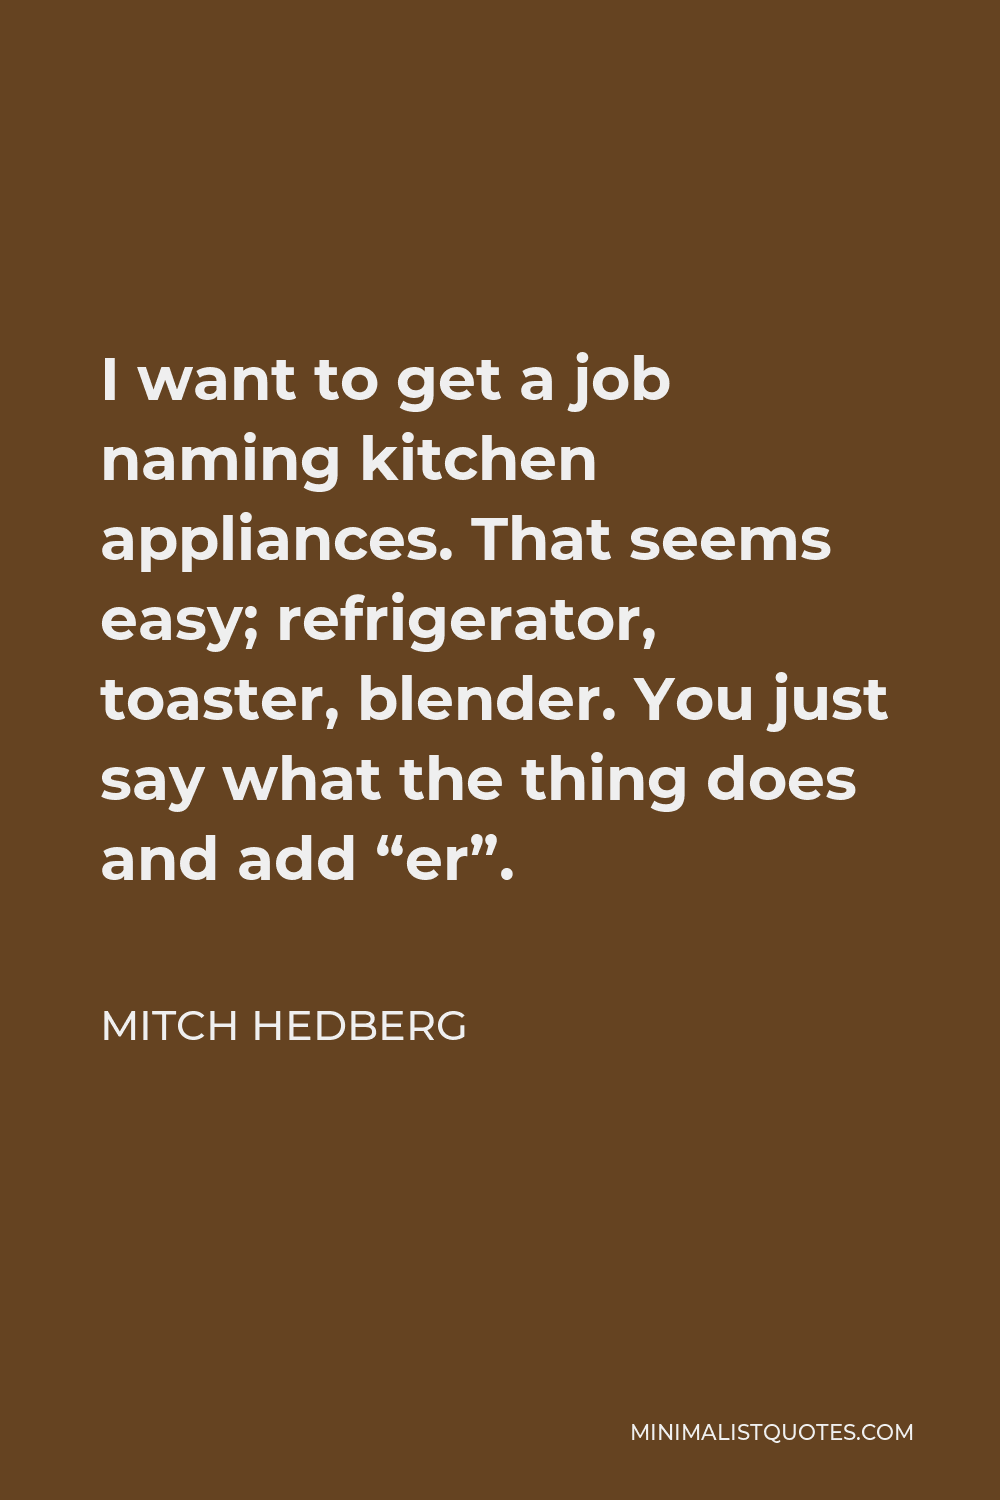 Mitch Hedberg Quote - I want to get a job naming kitchen appliances. That seems easy; refrigerator, toaster, blender. You just say what the thing does and add “er”.